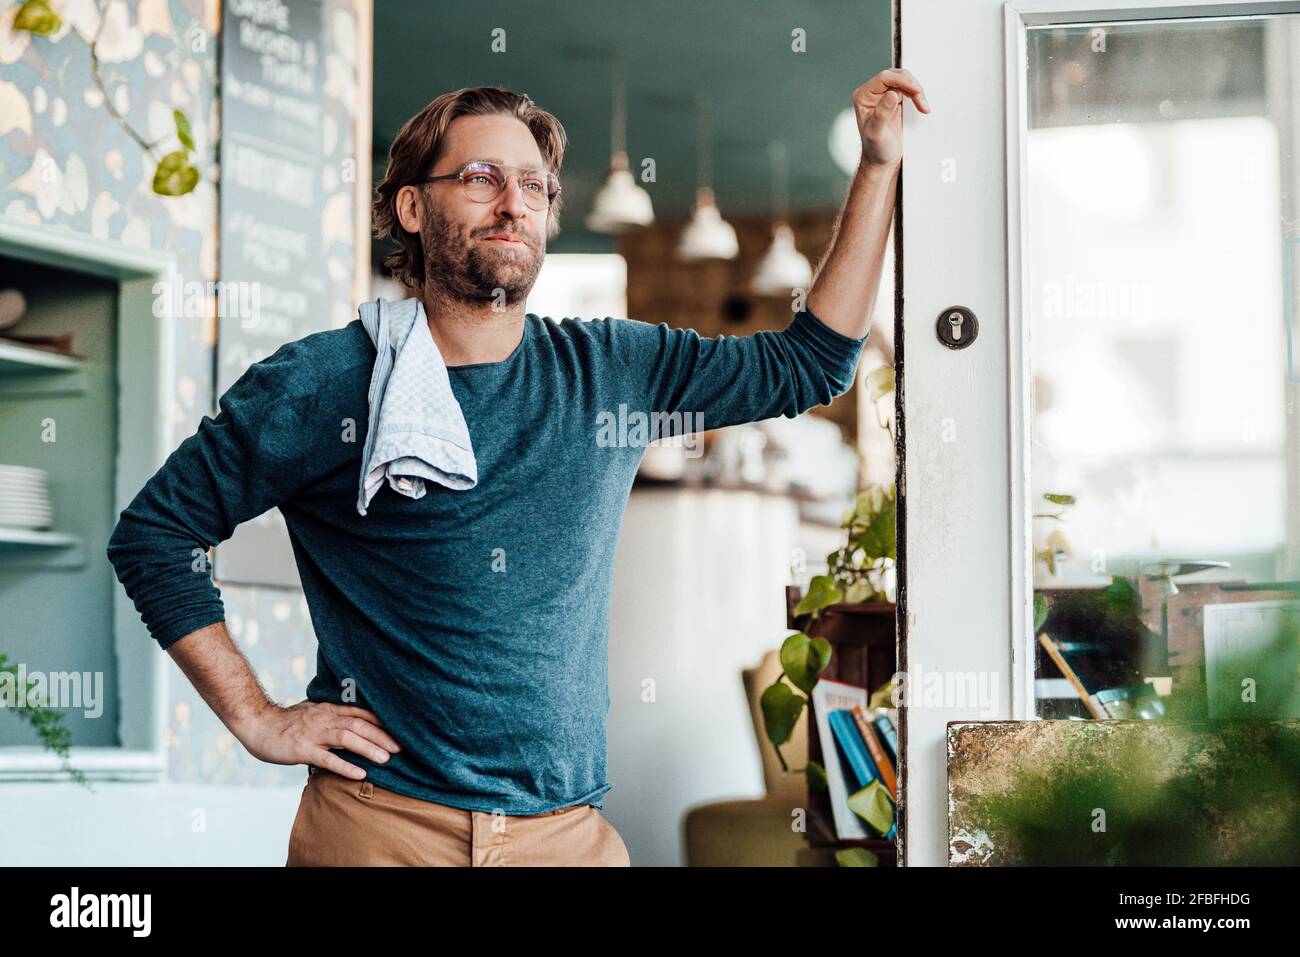 Mature male owner with hand on hip leaning over door at cafe Stock Photo